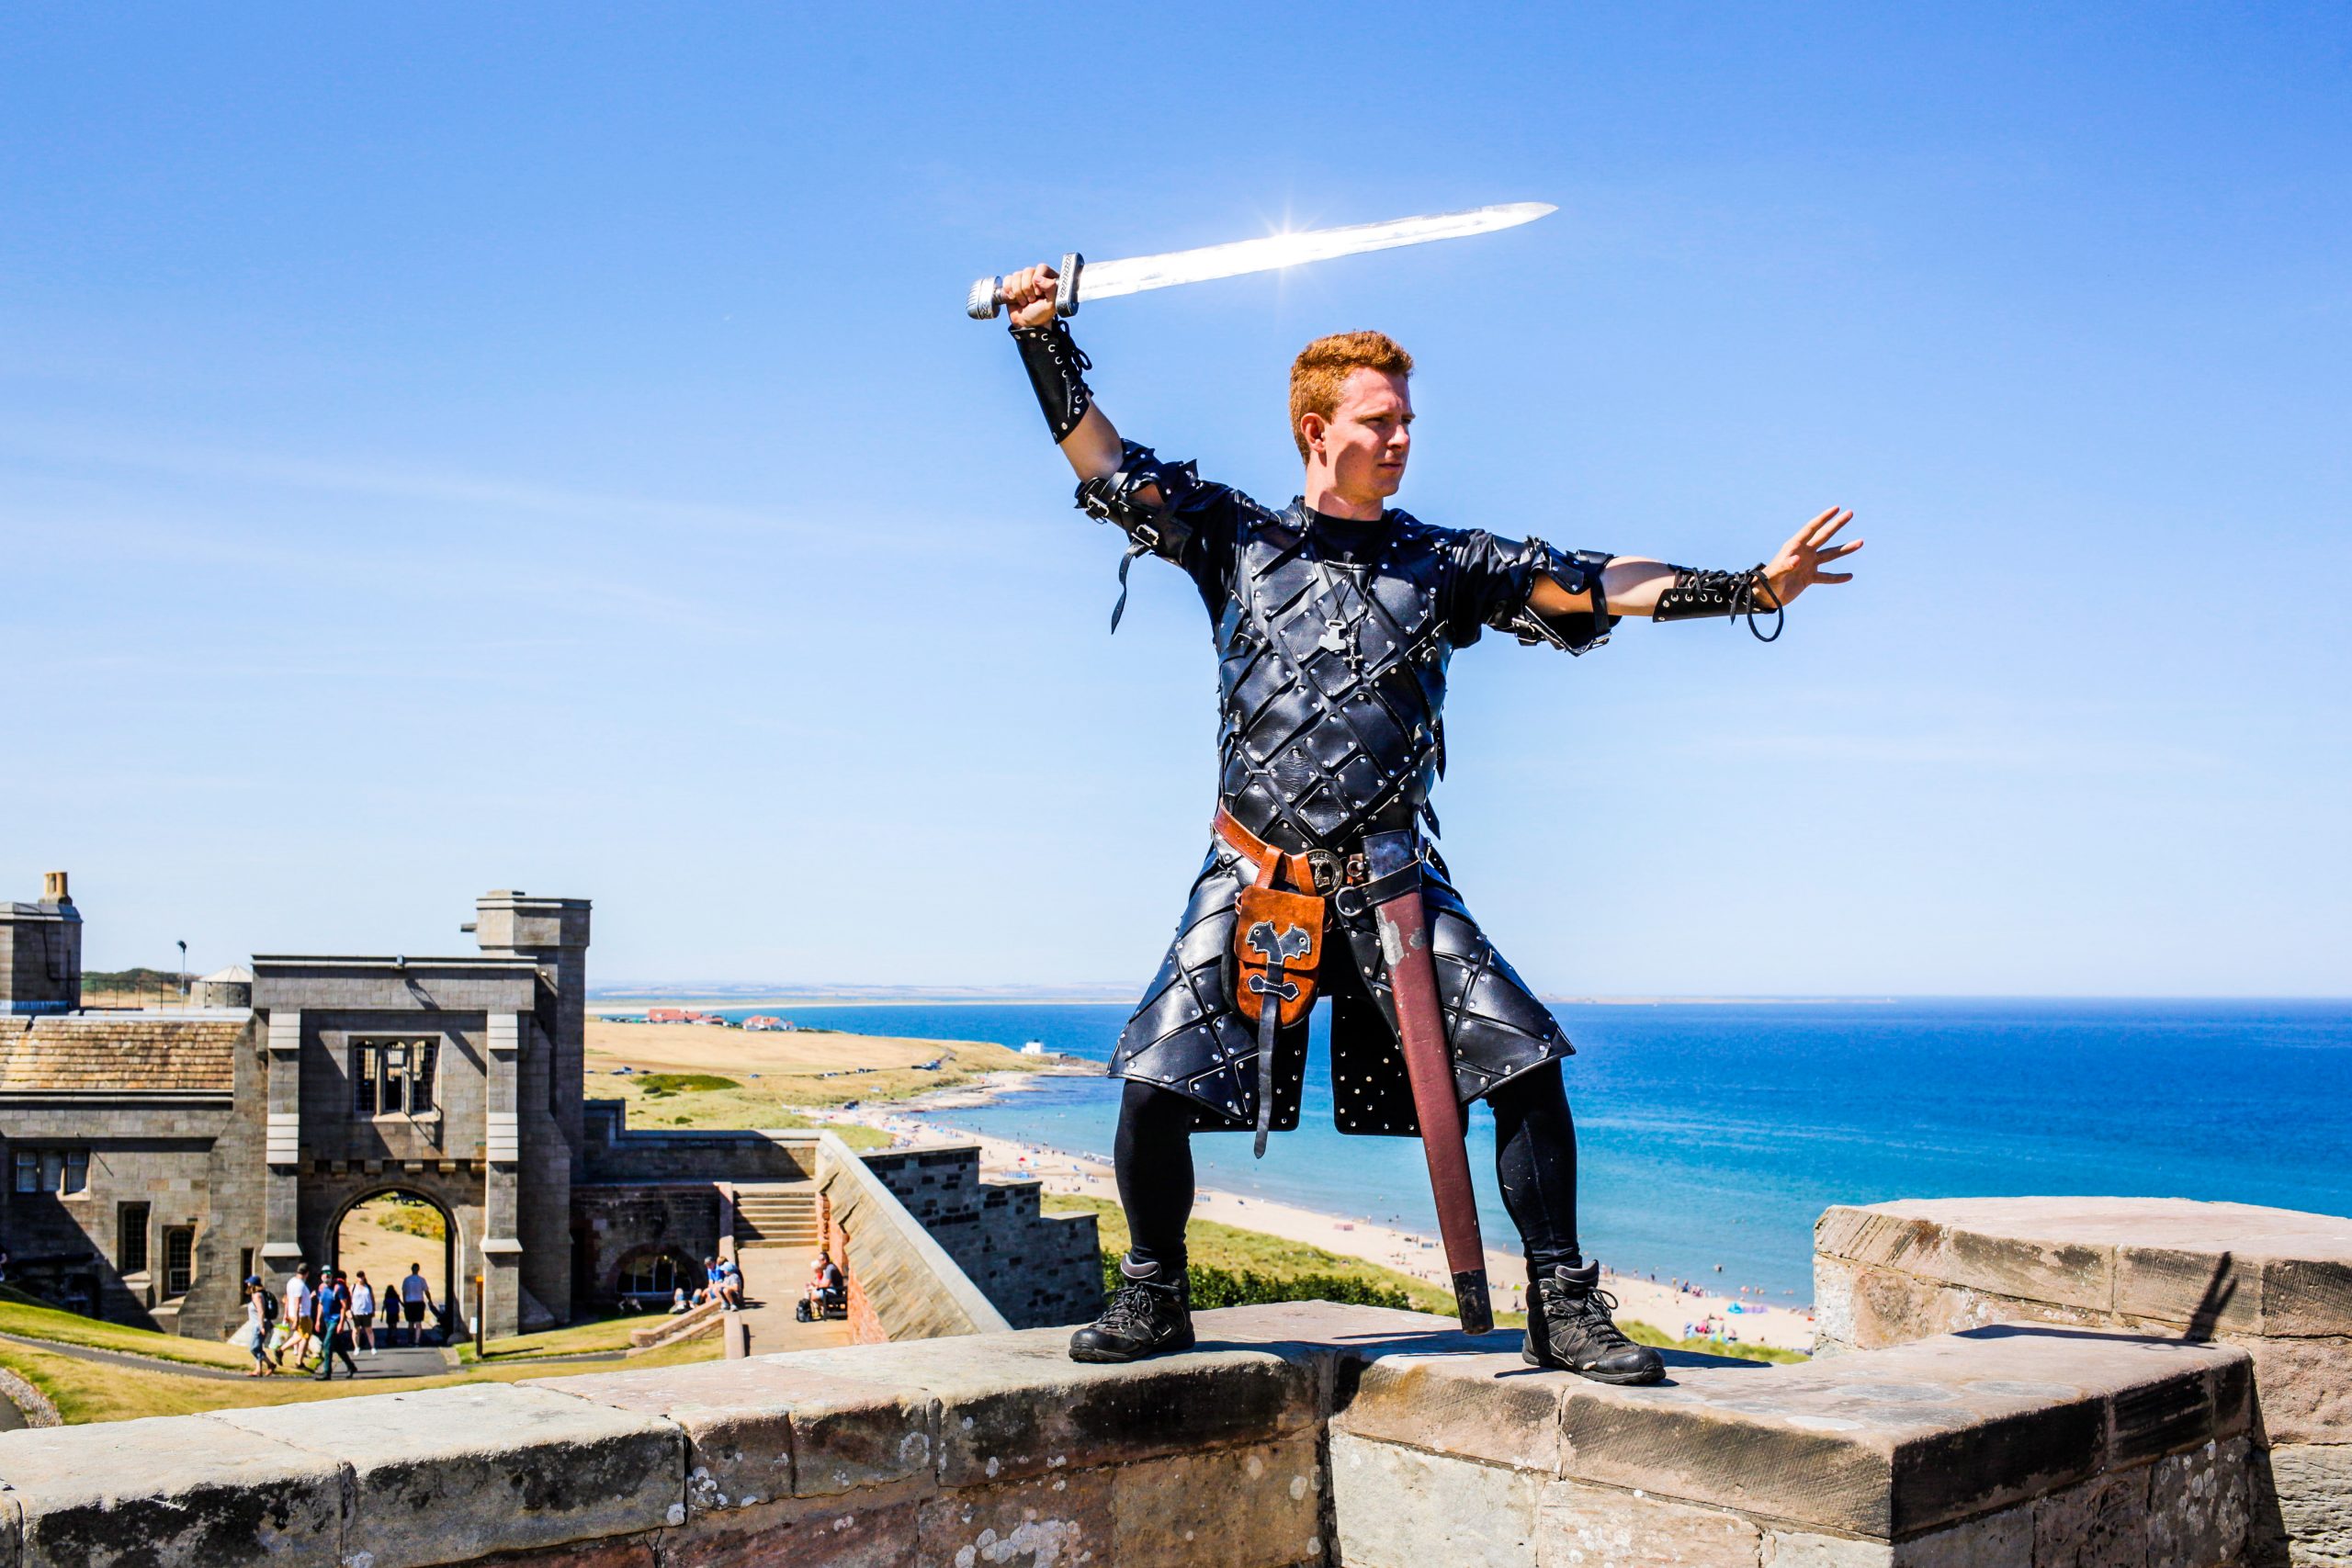 Who was Uhtred of Bamburgh?